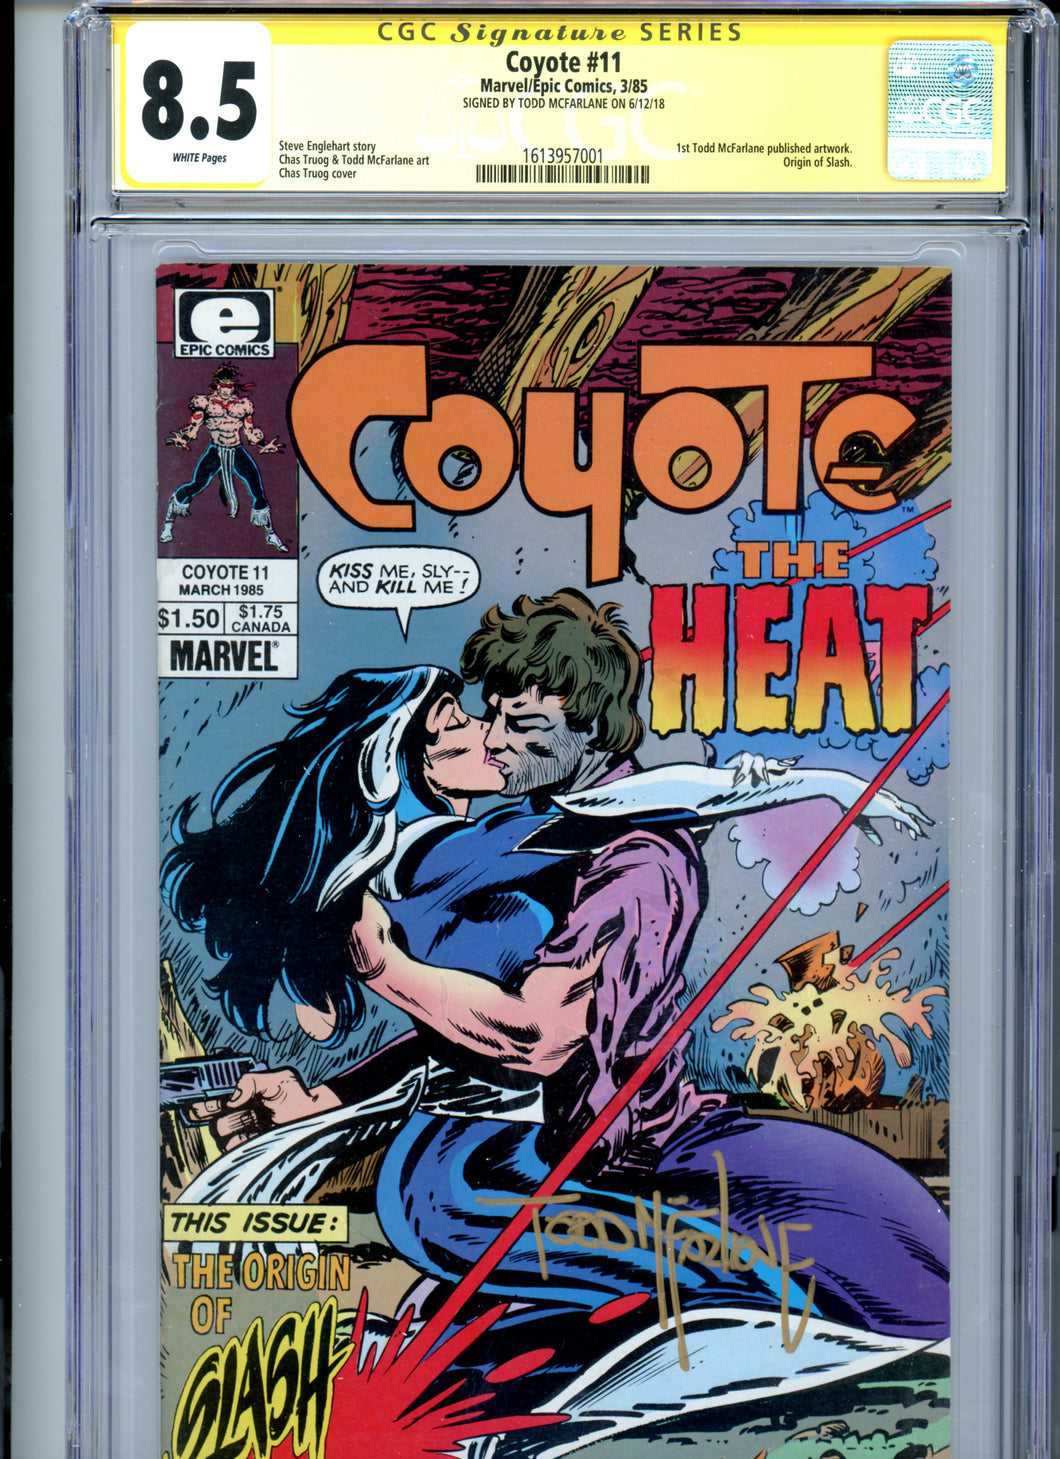 Coyote #11 - Signed by Todd McFarlane - CGC 8.5 - First McFarlane Art!